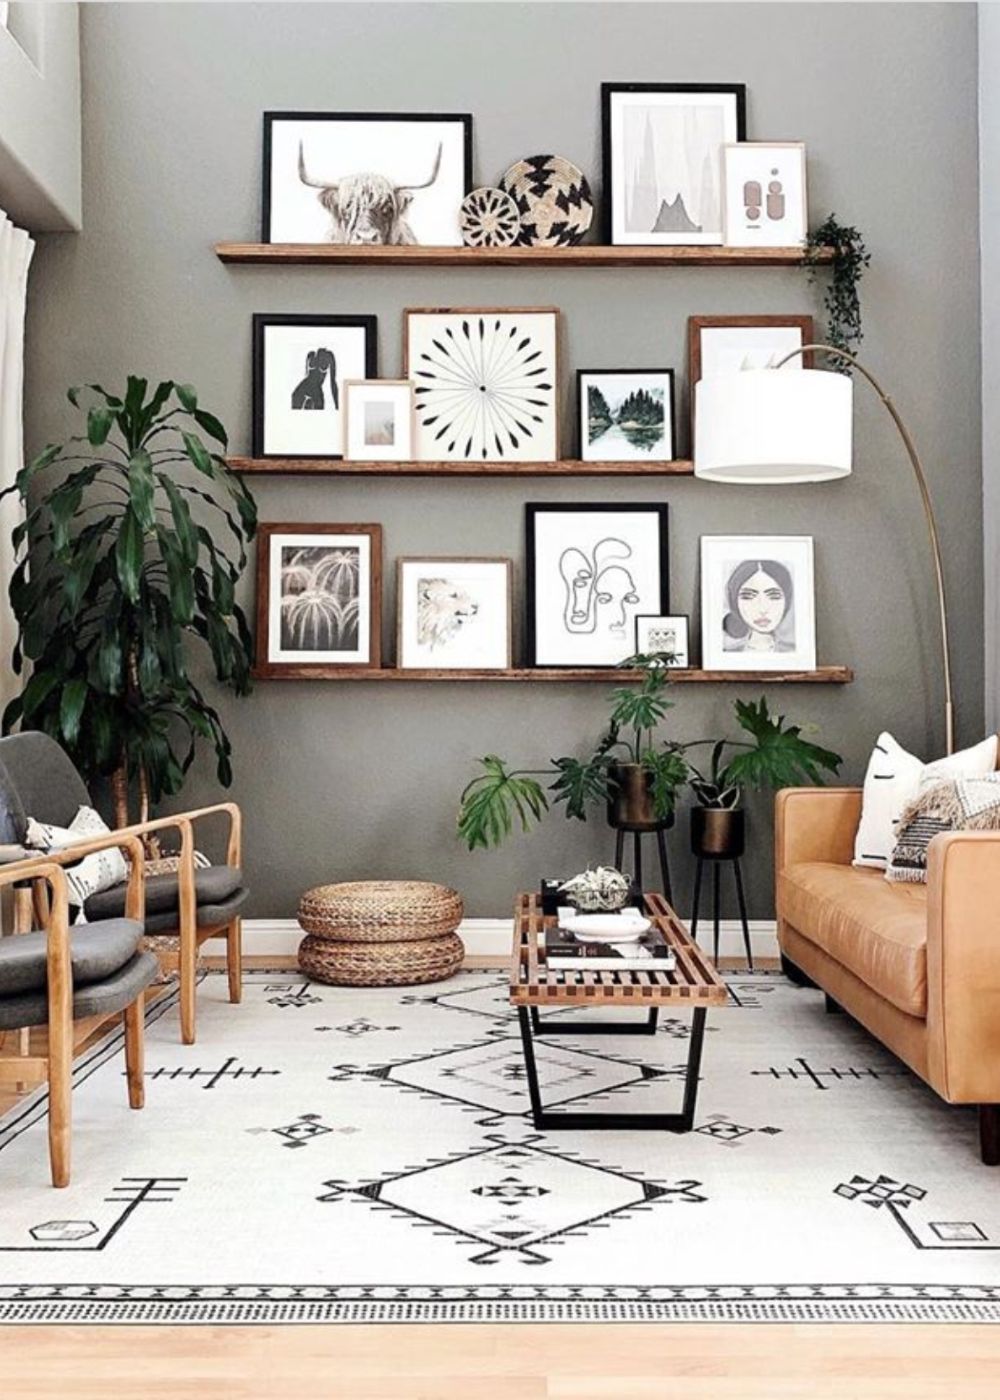 wall gallery on picture ledges. boho home design